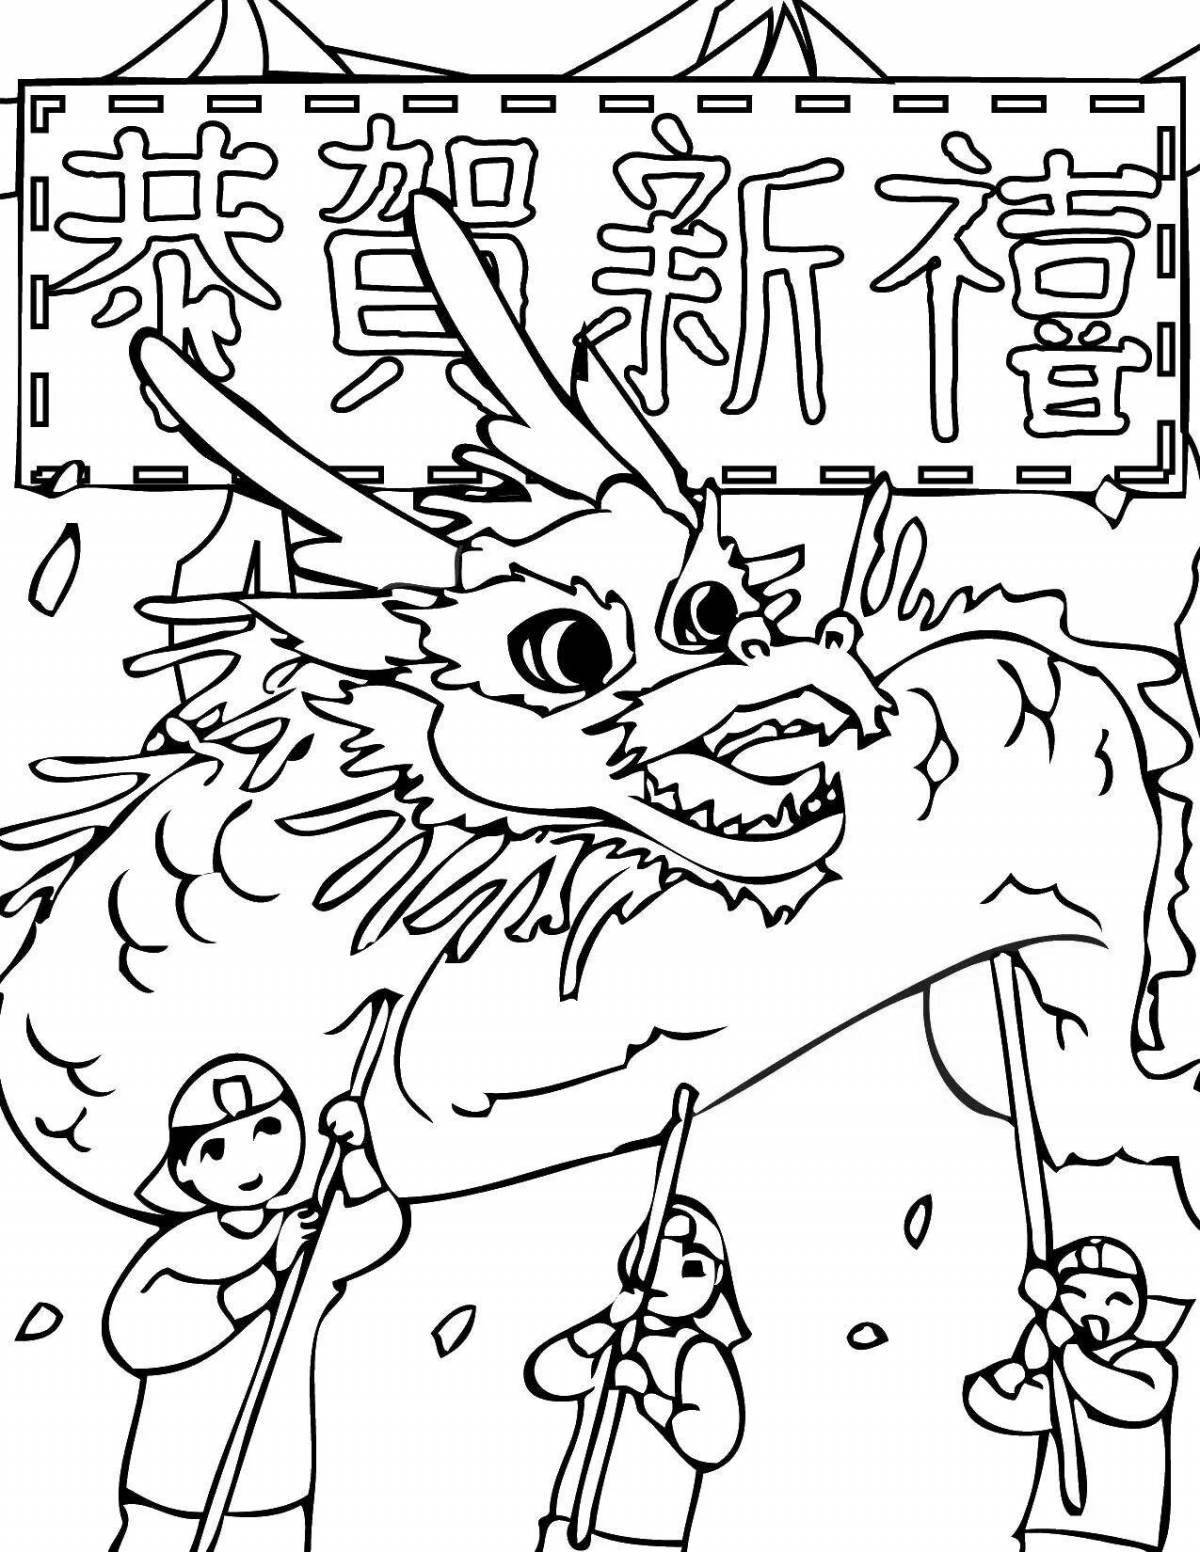 Bright Chinese New Year coloring book for kids